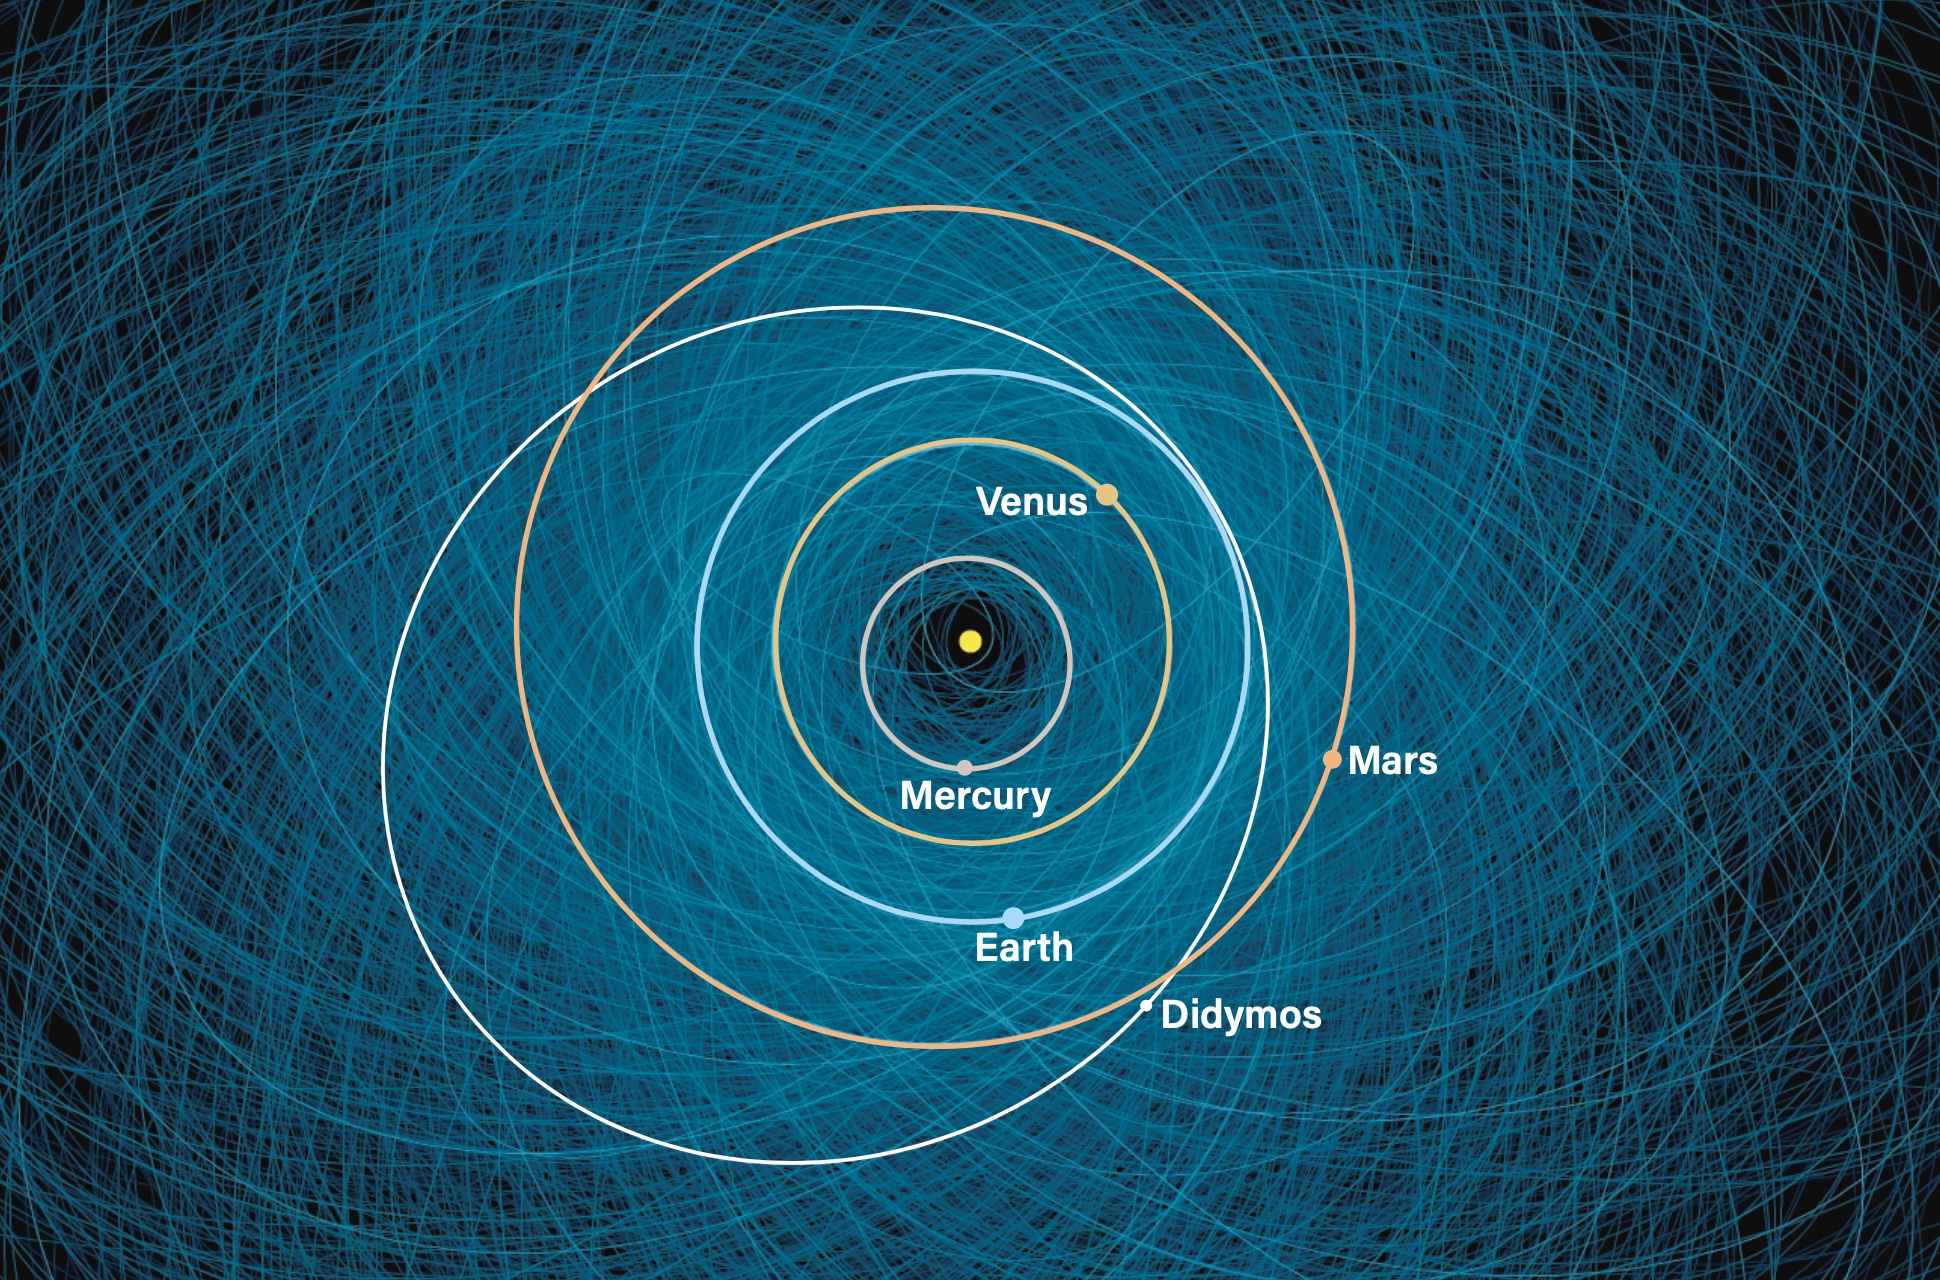 Astronomers deem an asteroid potentially hazardous if it is wider than about 460 feet (140 m) and comes within 5 million miles (8 million km) of Earth’s orbit. This chart plots the orbits of 2,200 such potentially hazardous asteroids. Highlighted in white is the orbit of Didymos; its smaller companion, Dimorphos, was the target of NASA’s Double Asteroid Redirect Test (DART) mission.